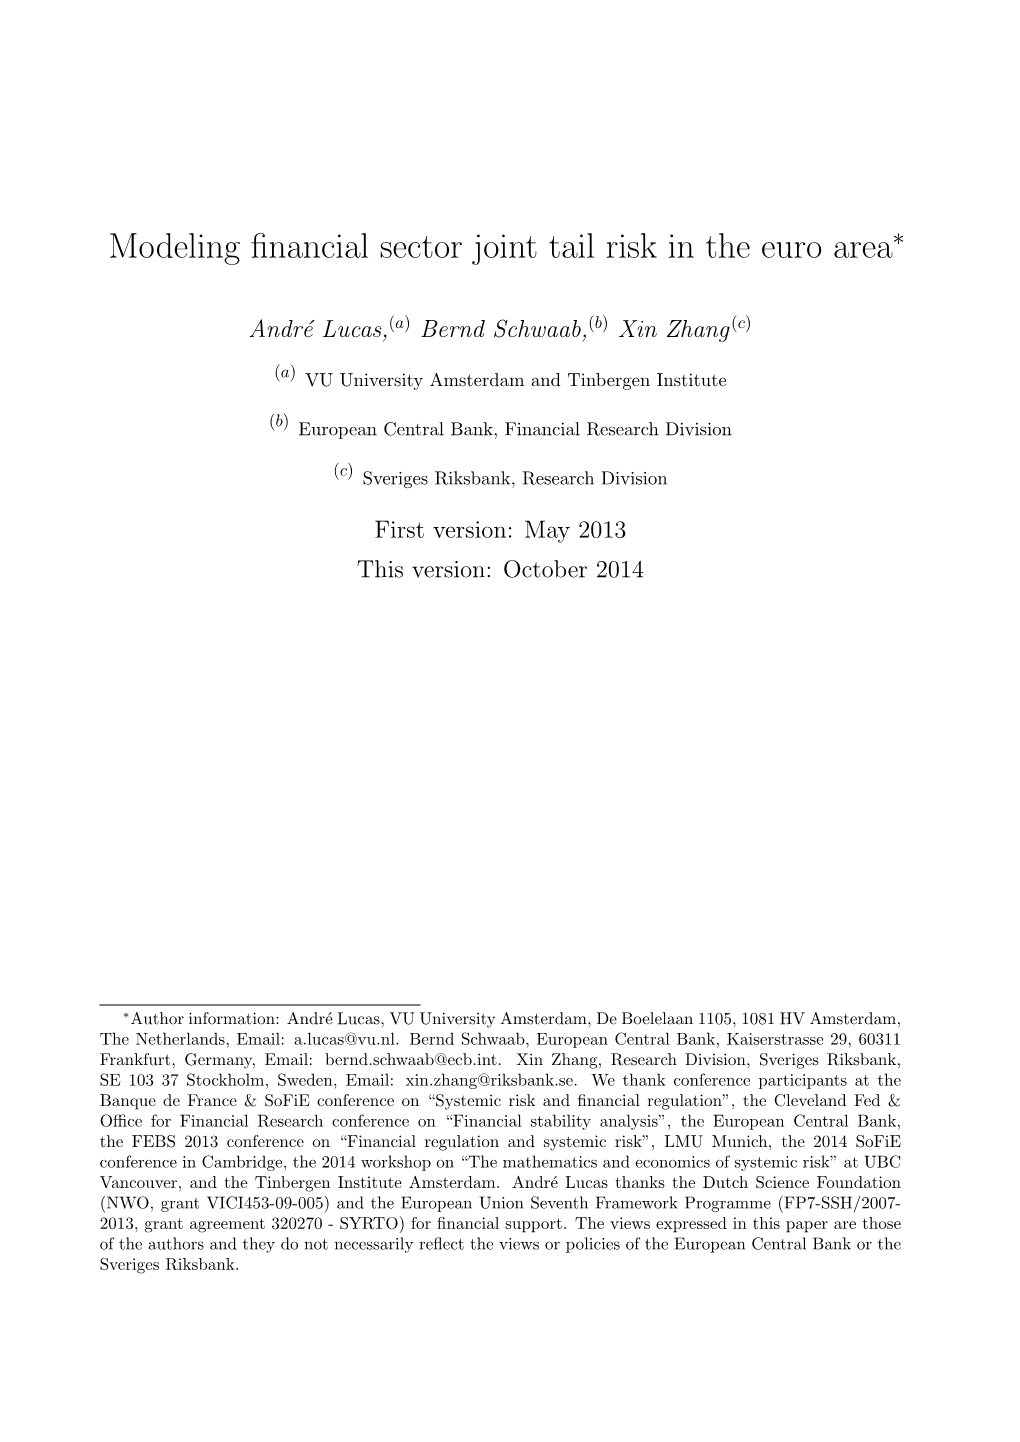 Modeling Financial Sector Joint Tail Risk in the Euro Area